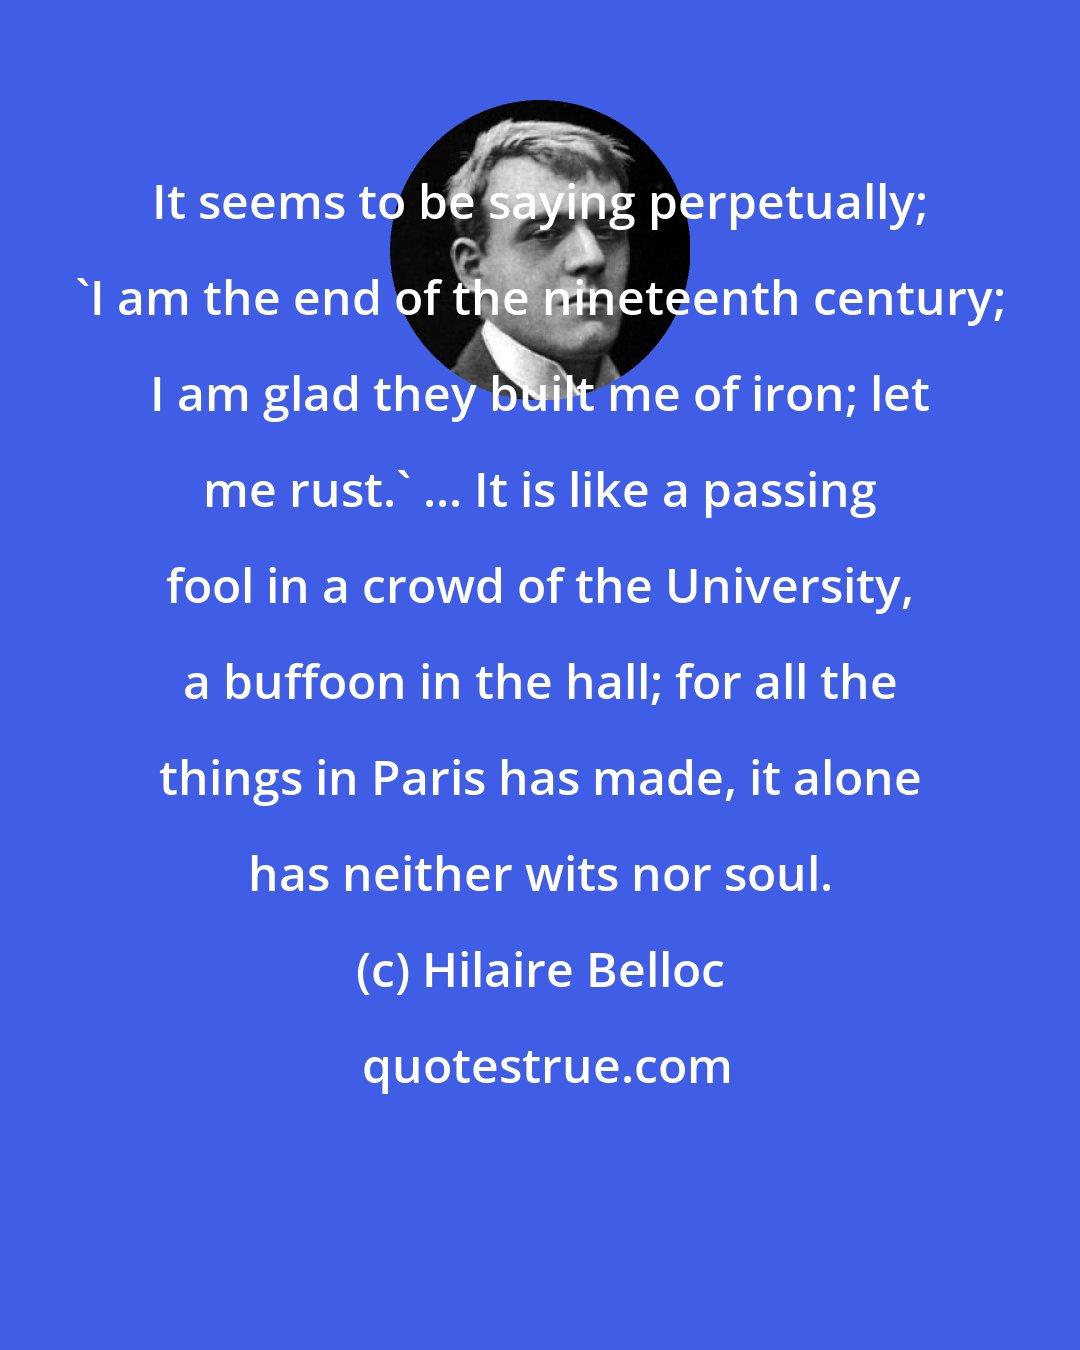 Hilaire Belloc: It seems to be saying perpetually; 'I am the end of the nineteenth century; I am glad they built me of iron; let me rust.' ... It is like a passing fool in a crowd of the University, a buffoon in the hall; for all the things in Paris has made, it alone has neither wits nor soul.